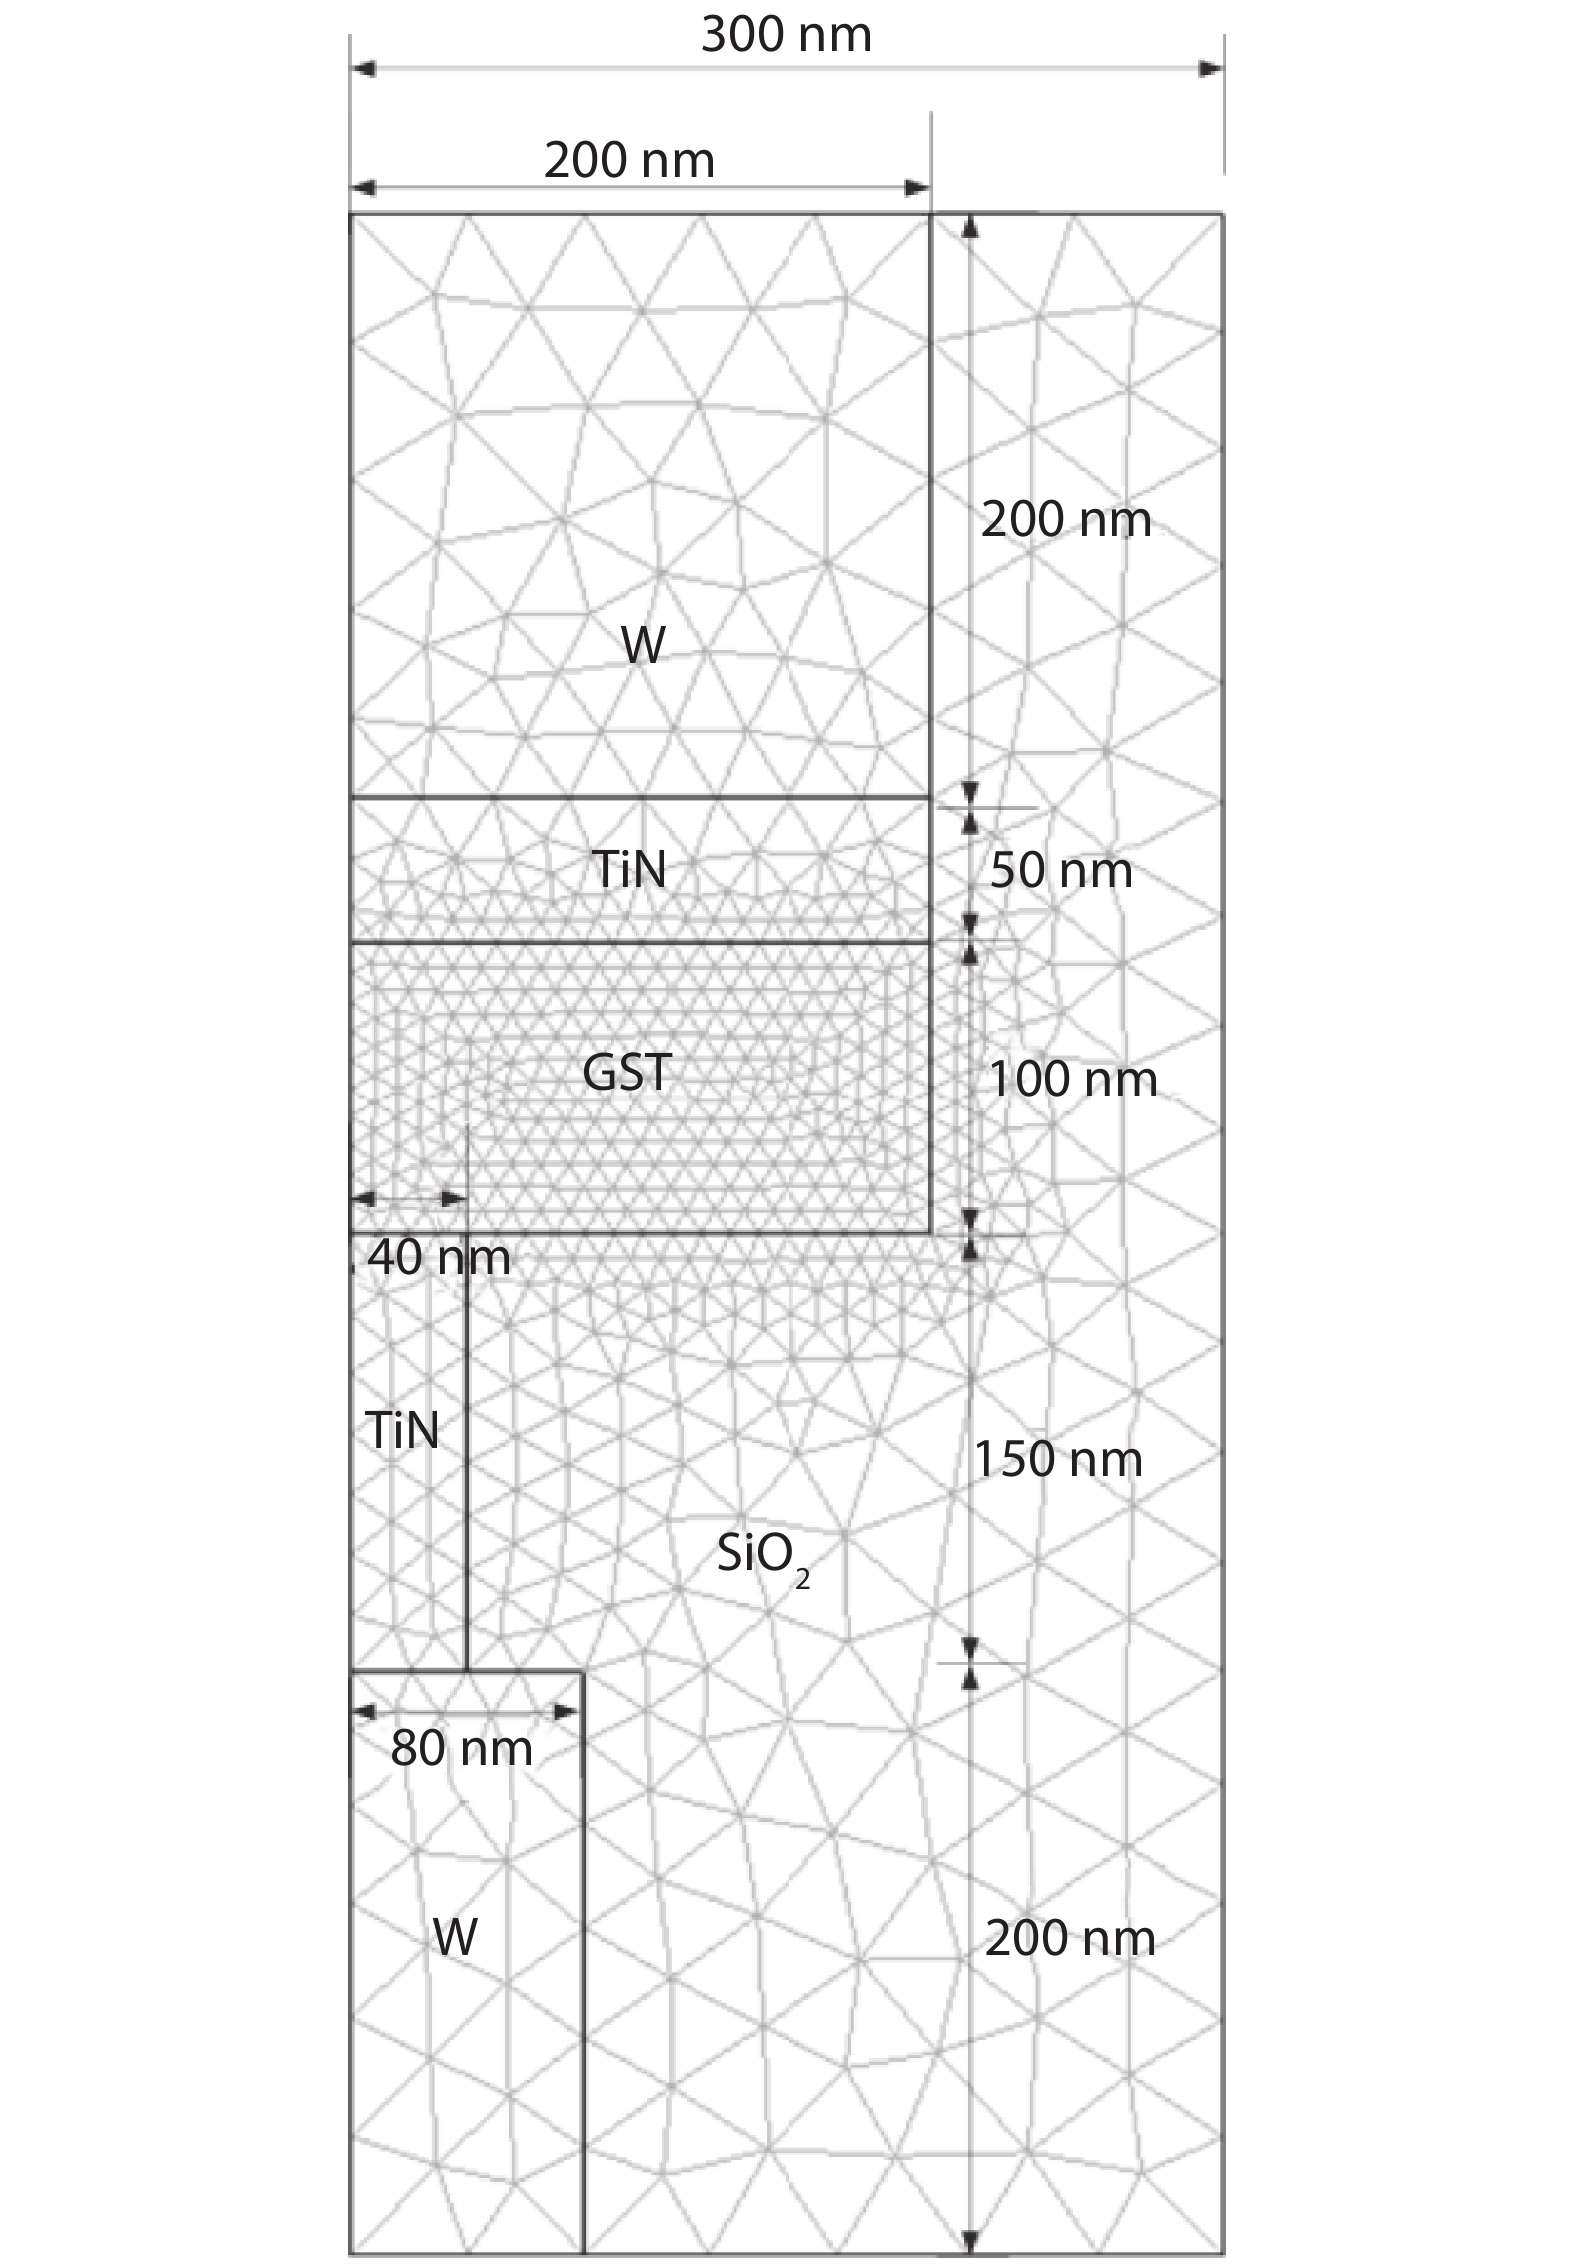 (Color online) Geometries and schematic cross section of the T-shaped PCM cell.